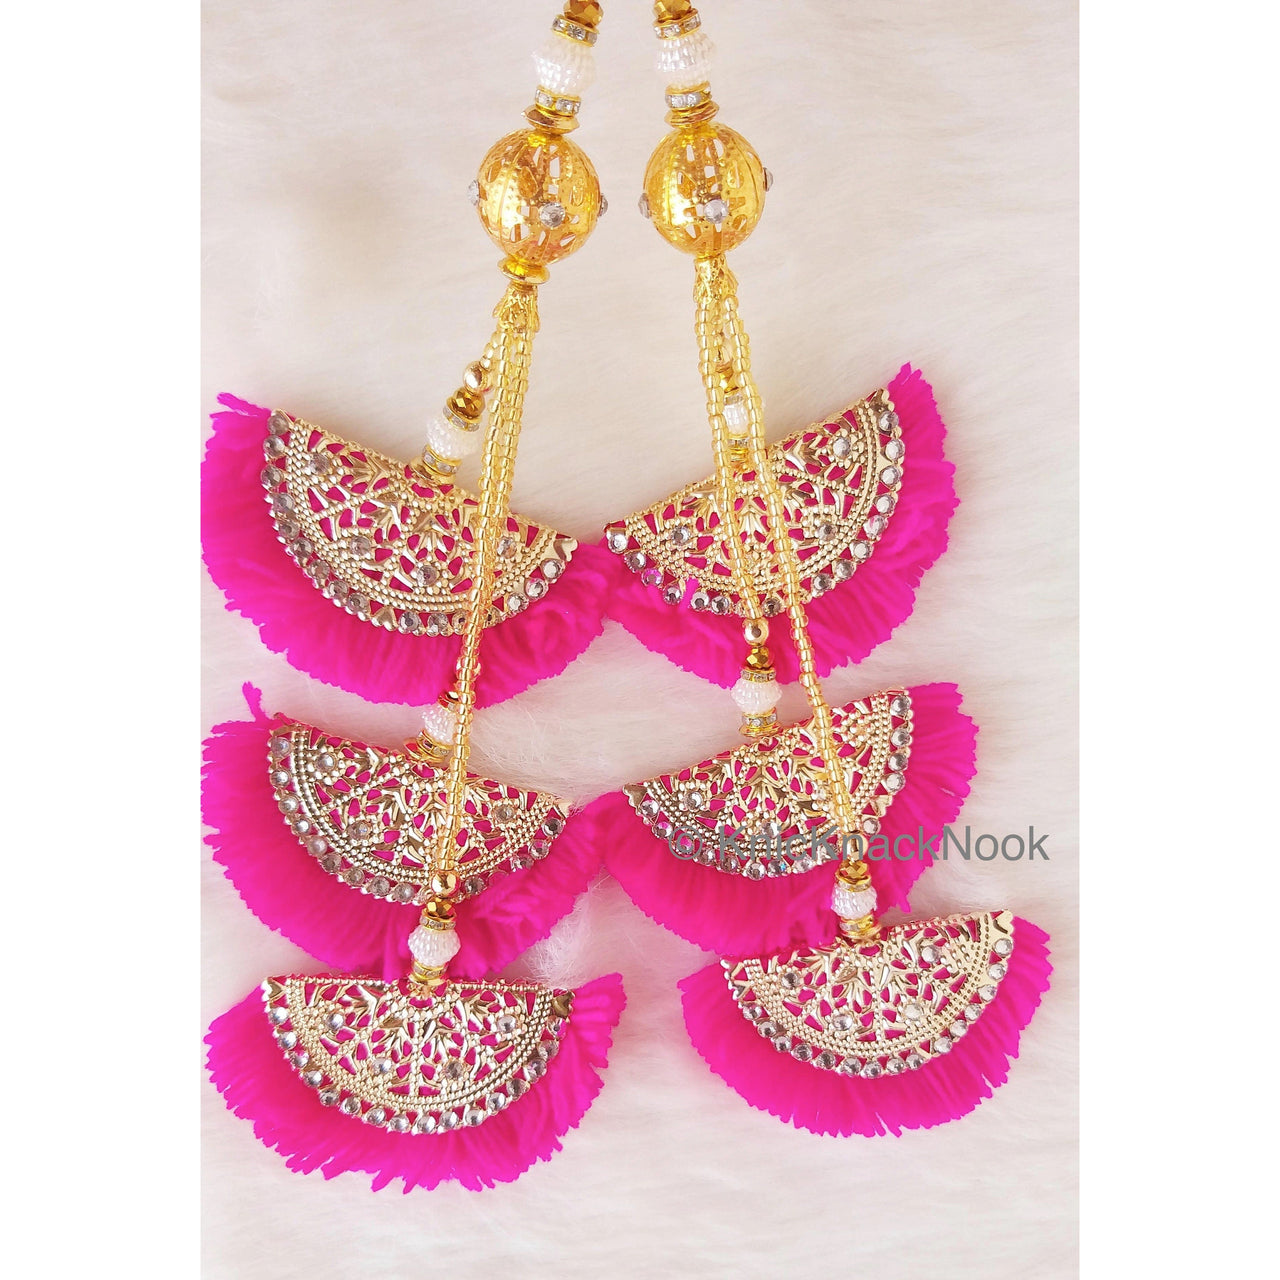 Blue / Pink Fan Tassels With Silver and Gold Filigree Embellishments, Wool Tassels, Embellishments